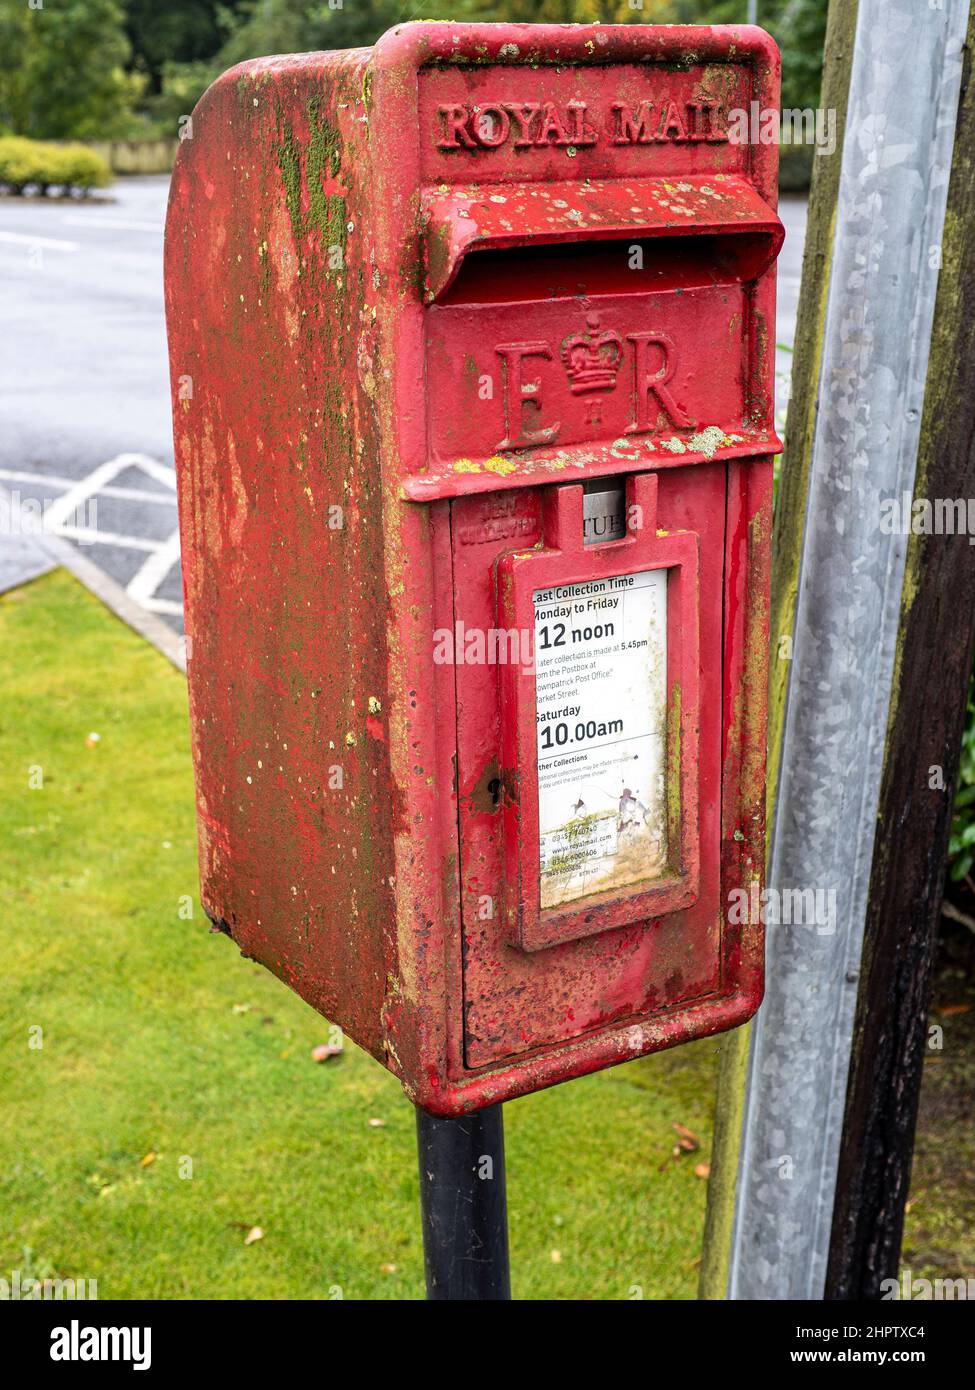 Small Damp  Royal Mail box: A small roadside royal mail post box in the village of Raffry in Norther Ireland. The damp climate has decorated the box with lichen, algea and rust. Stock Photo